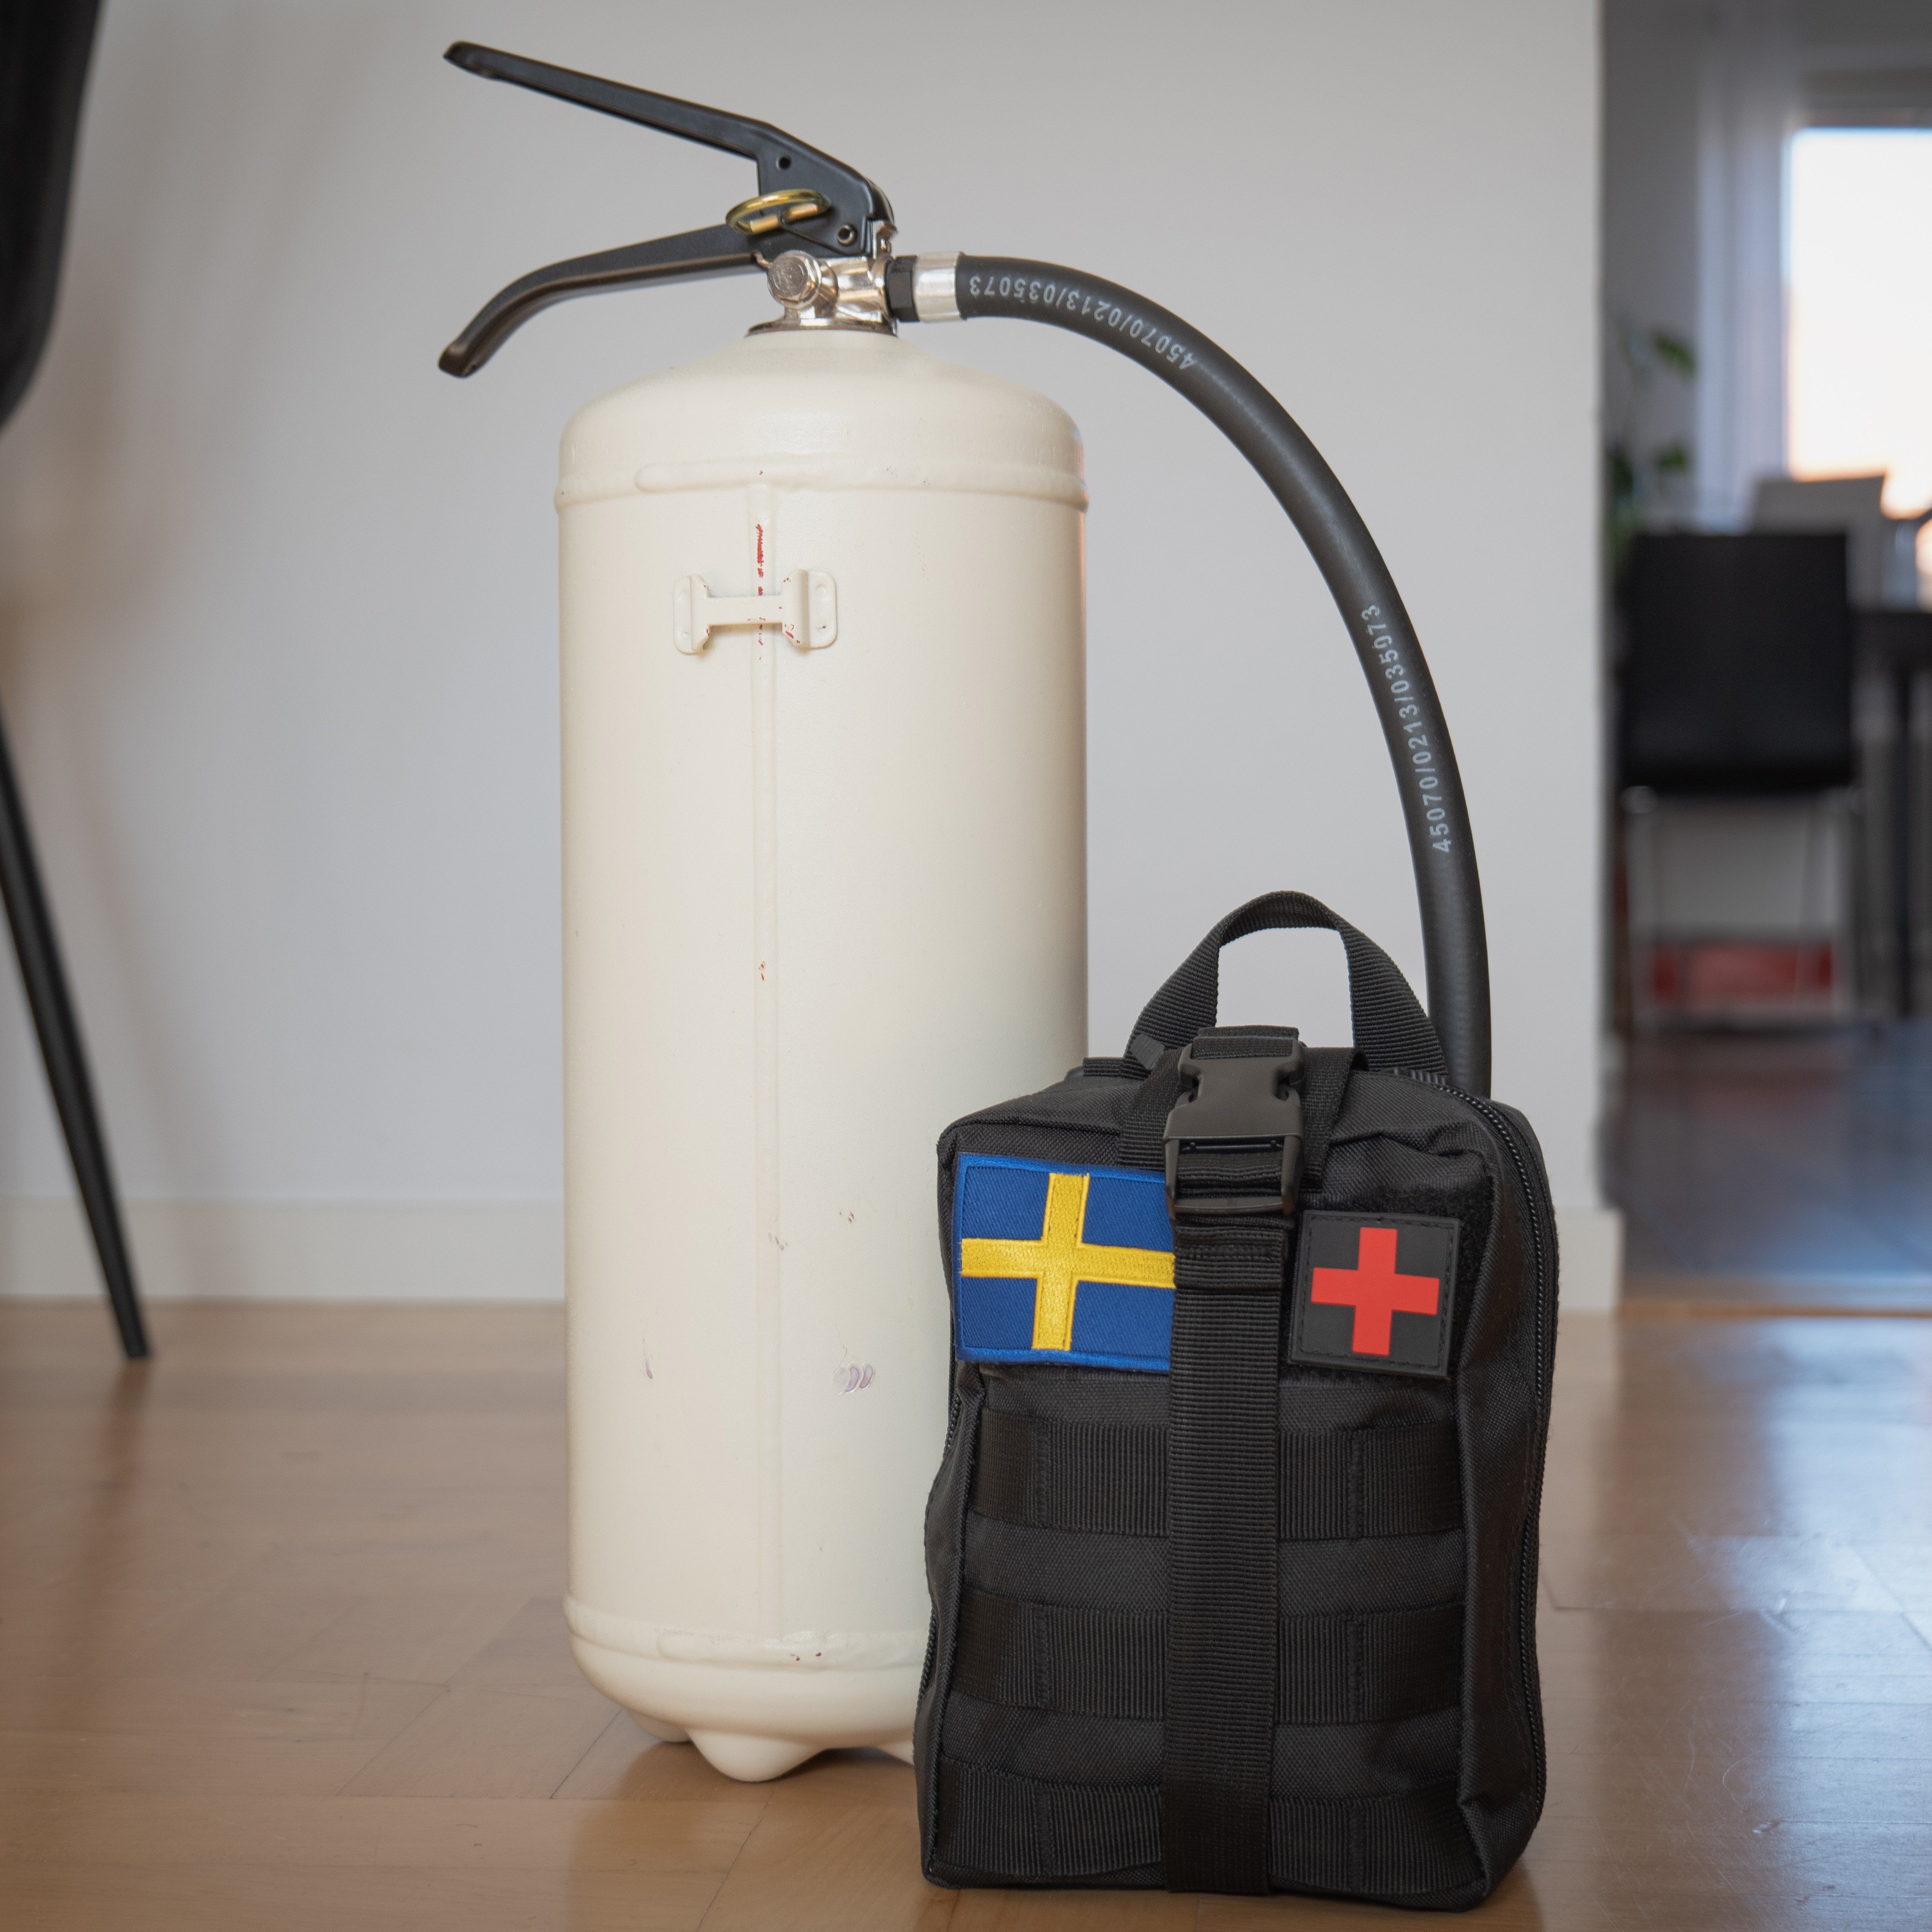 A survival kit next to a fire extinguisher, placed on a wooden floor in an indoor setting